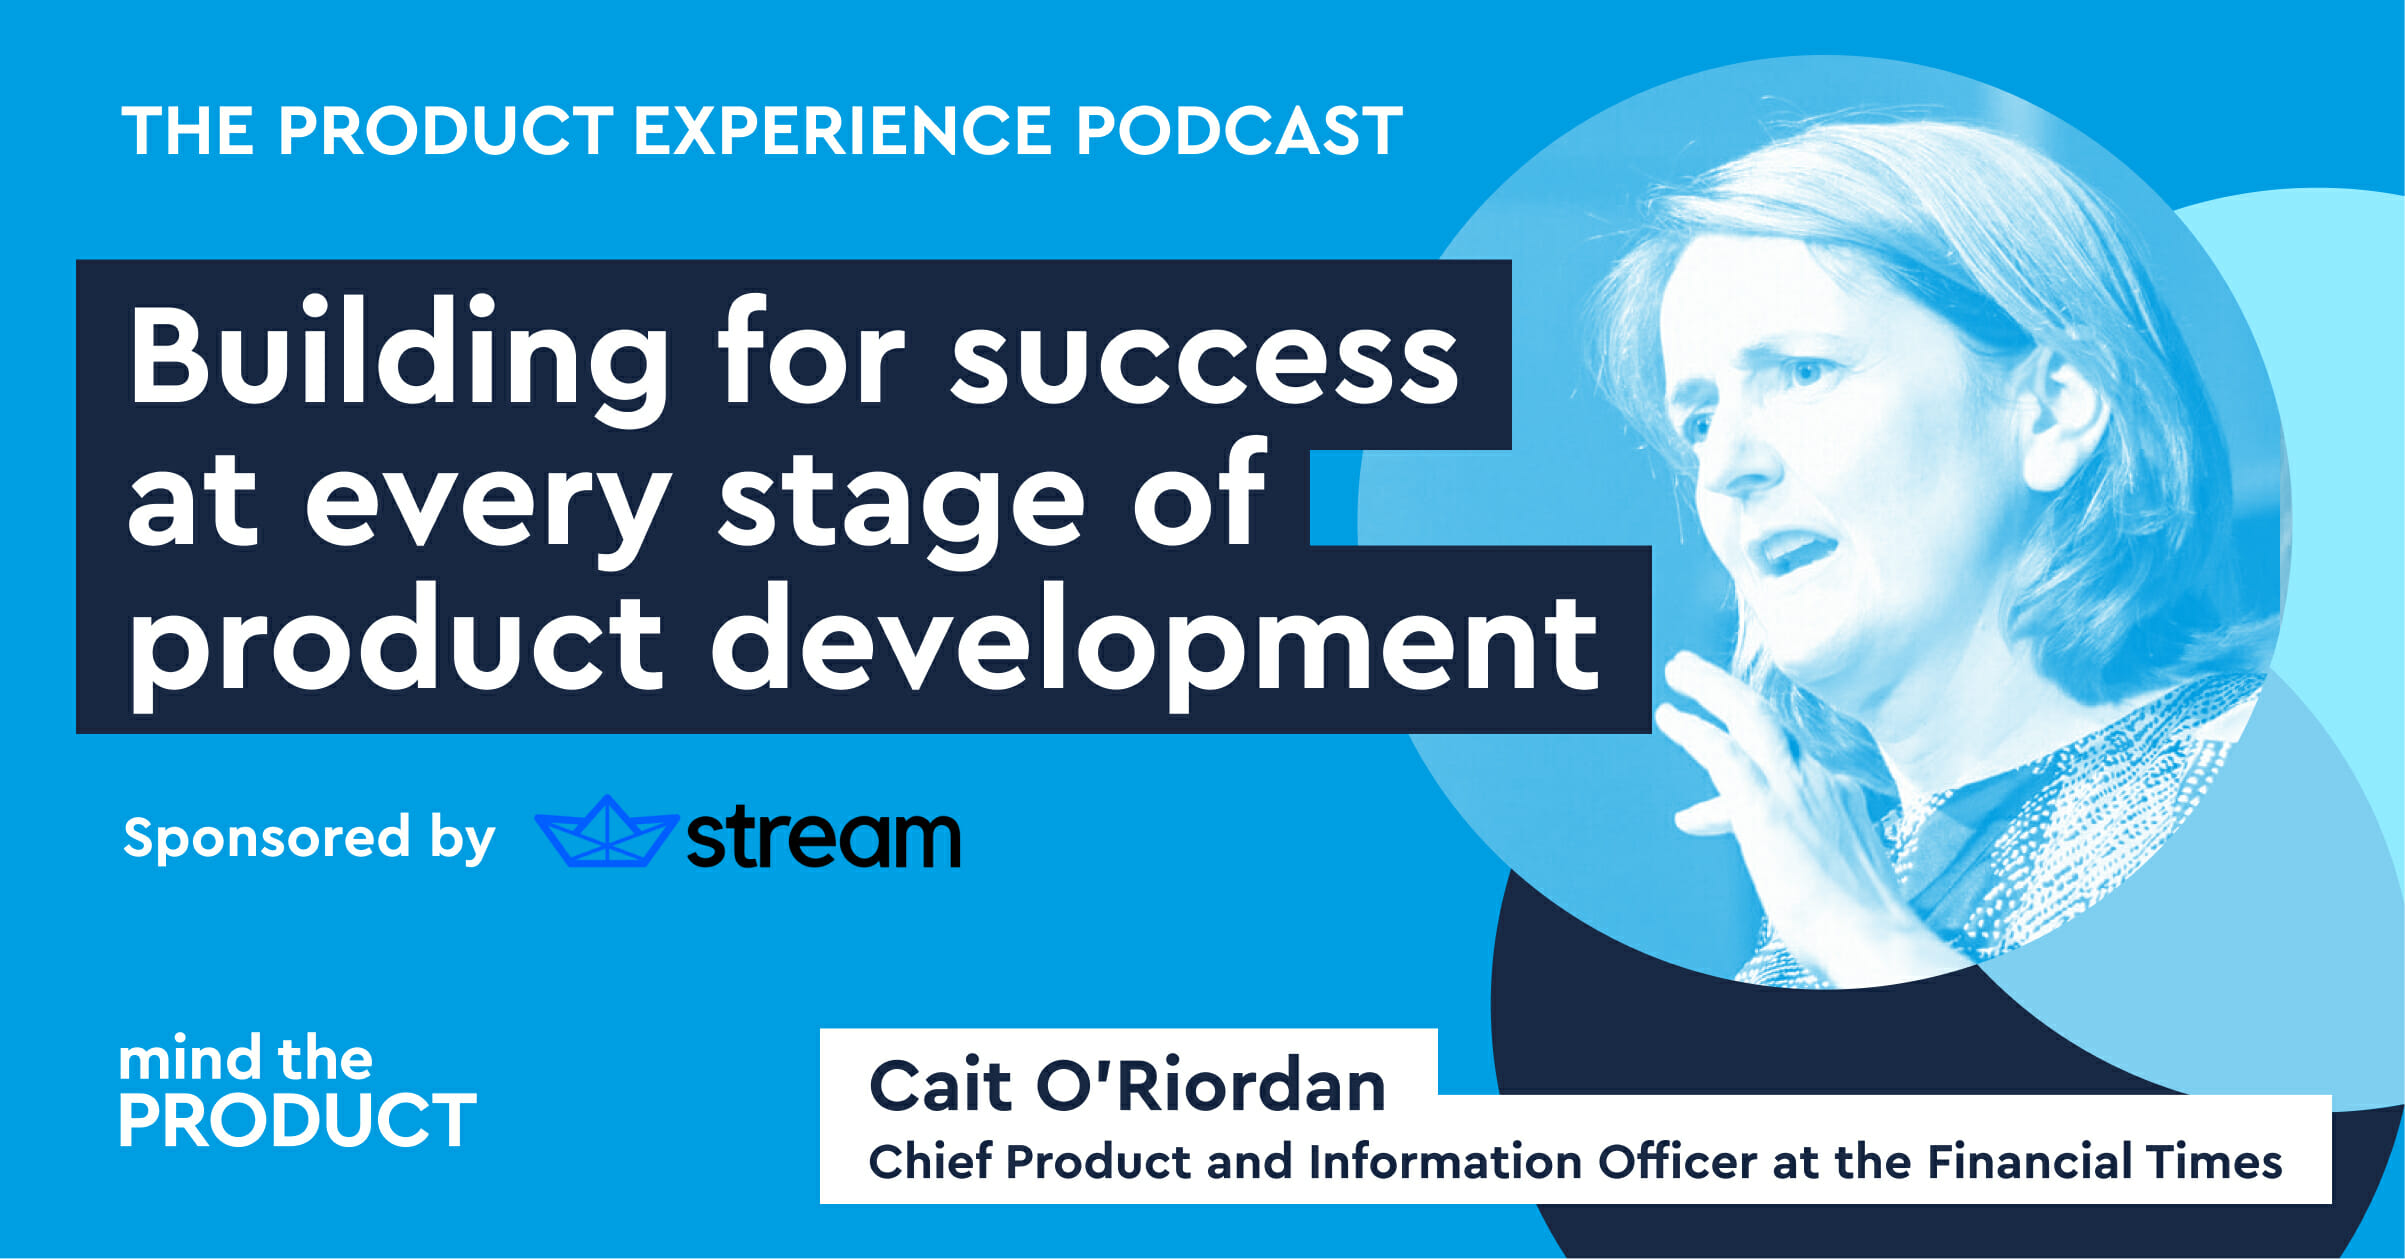 Cait O'Riordan on The Product Experience Podcast